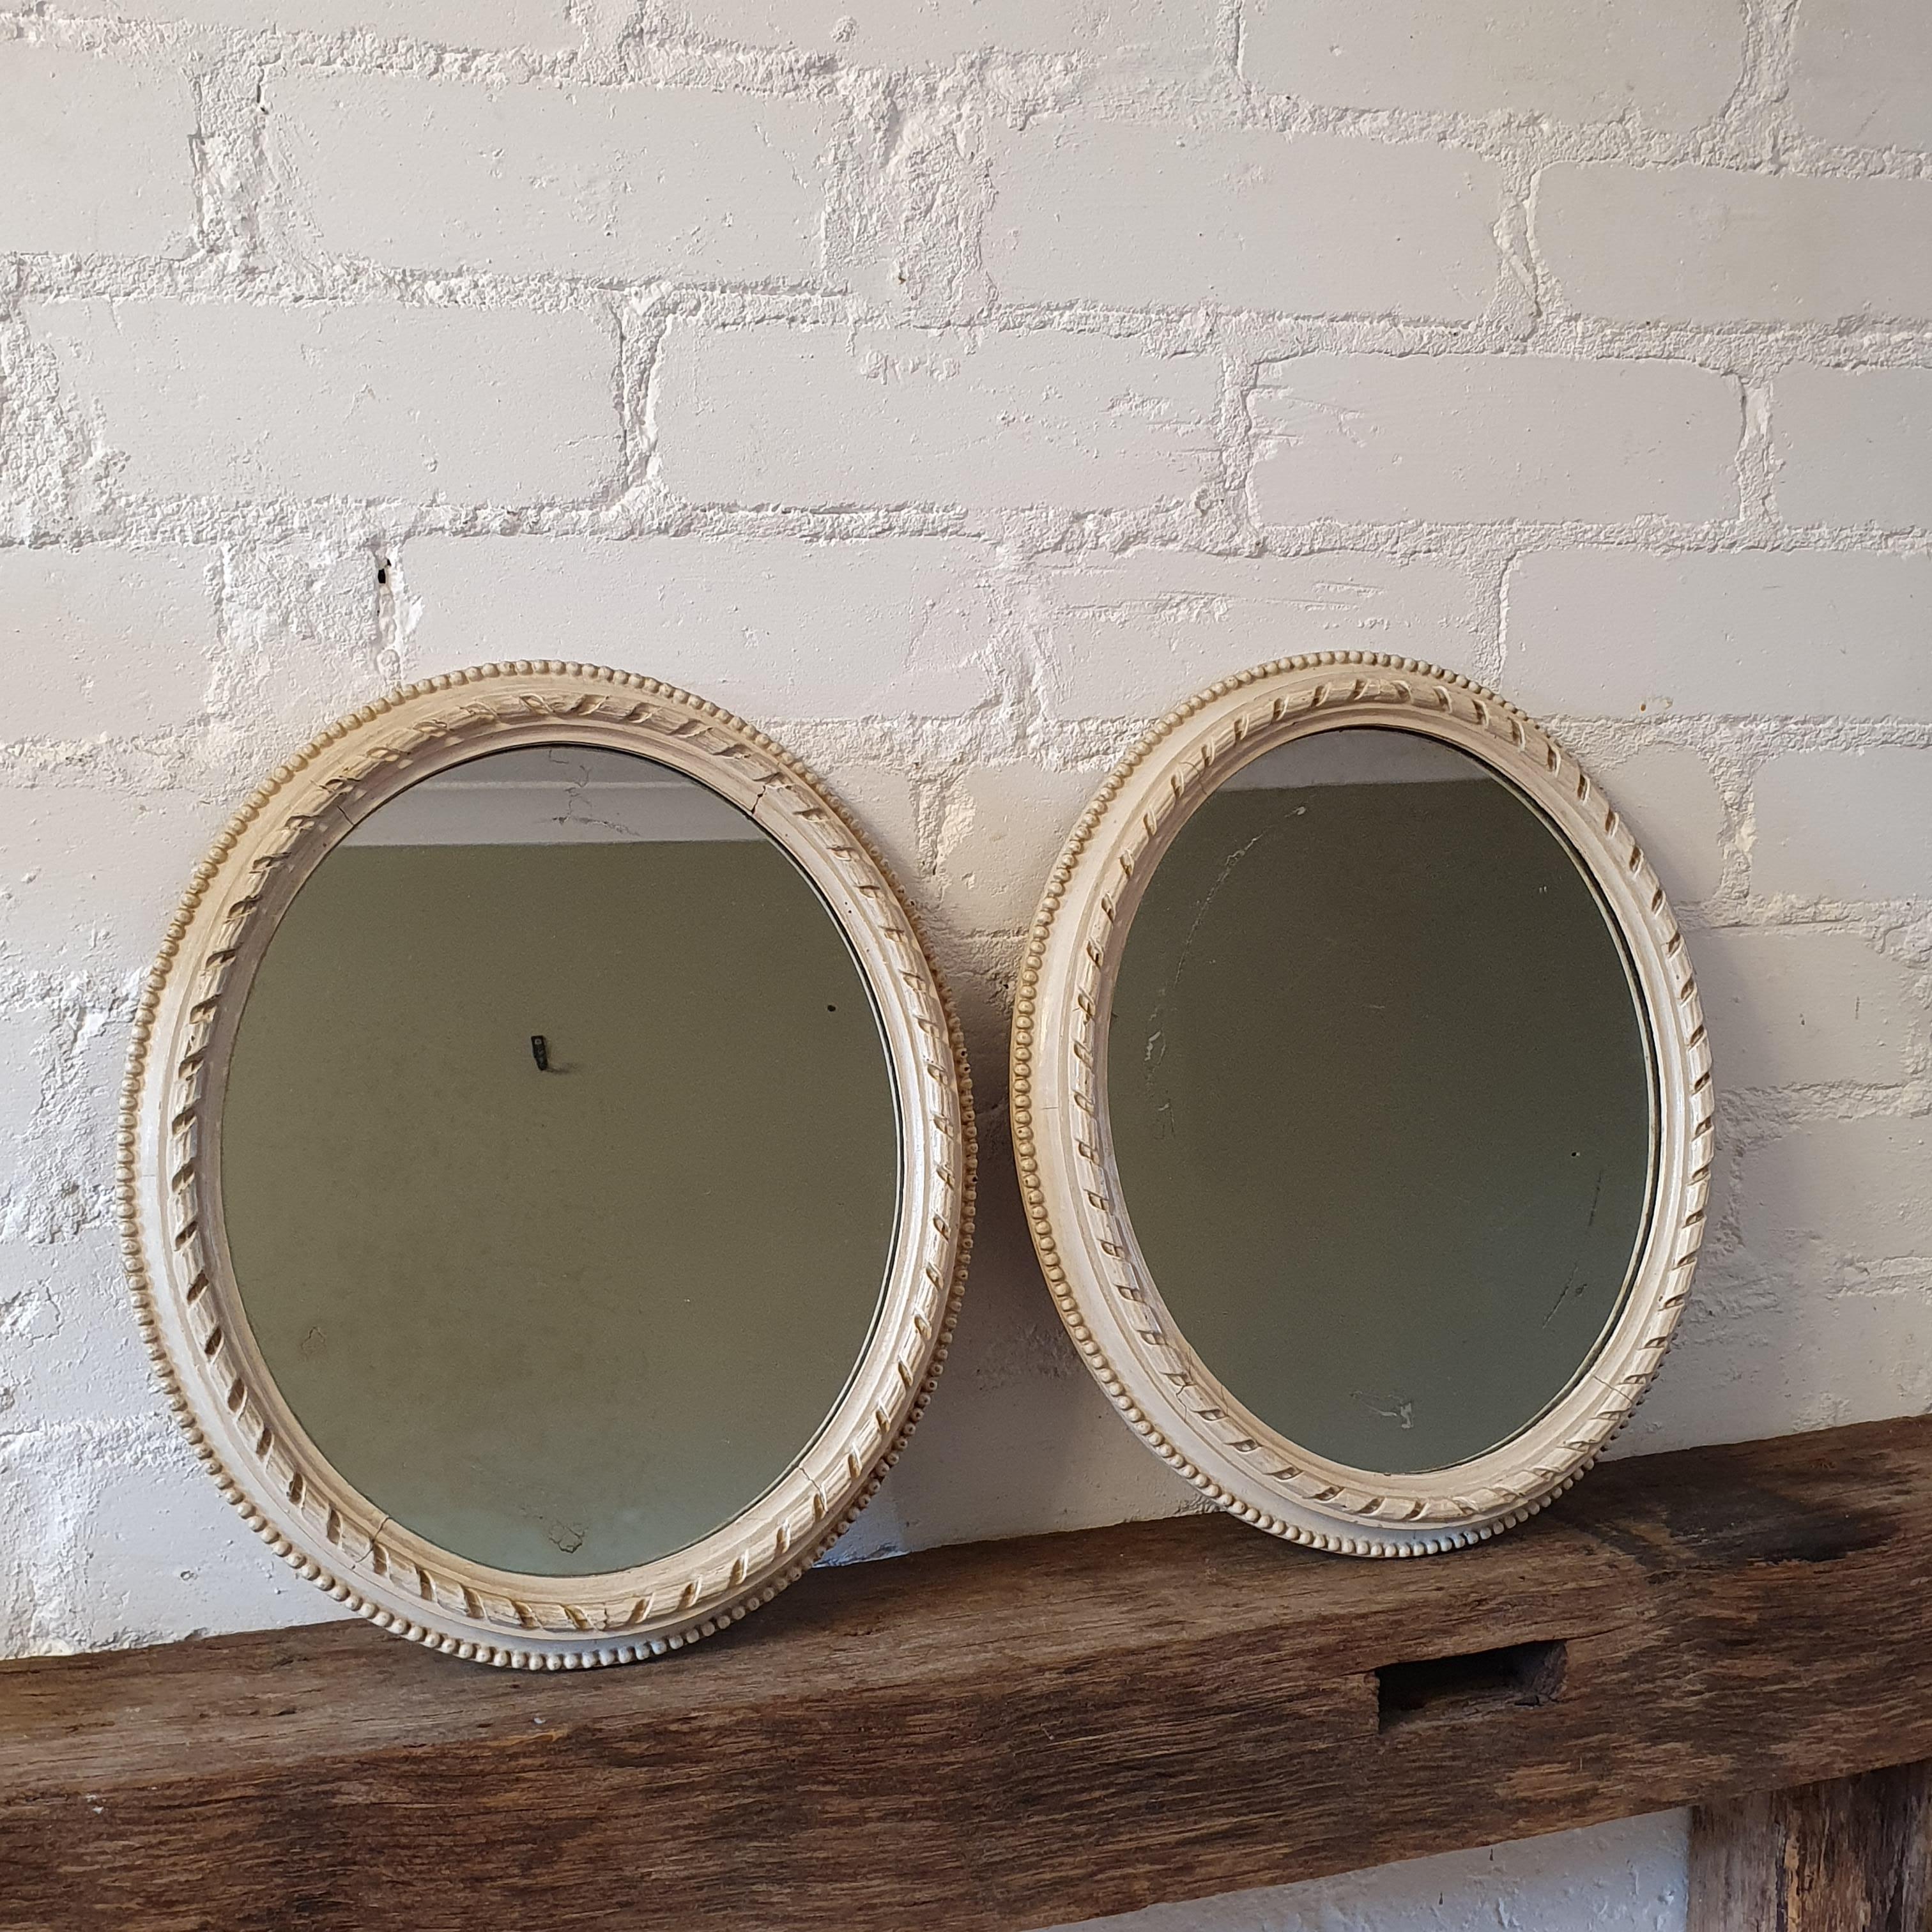 19th Century painted English miniature oval frame mirrors, ivory painted frames with ribbon and stick ornament. Little bead course along the edge. Both frames contain original mercury glass plates with sign of age (some scratches and spots) Very